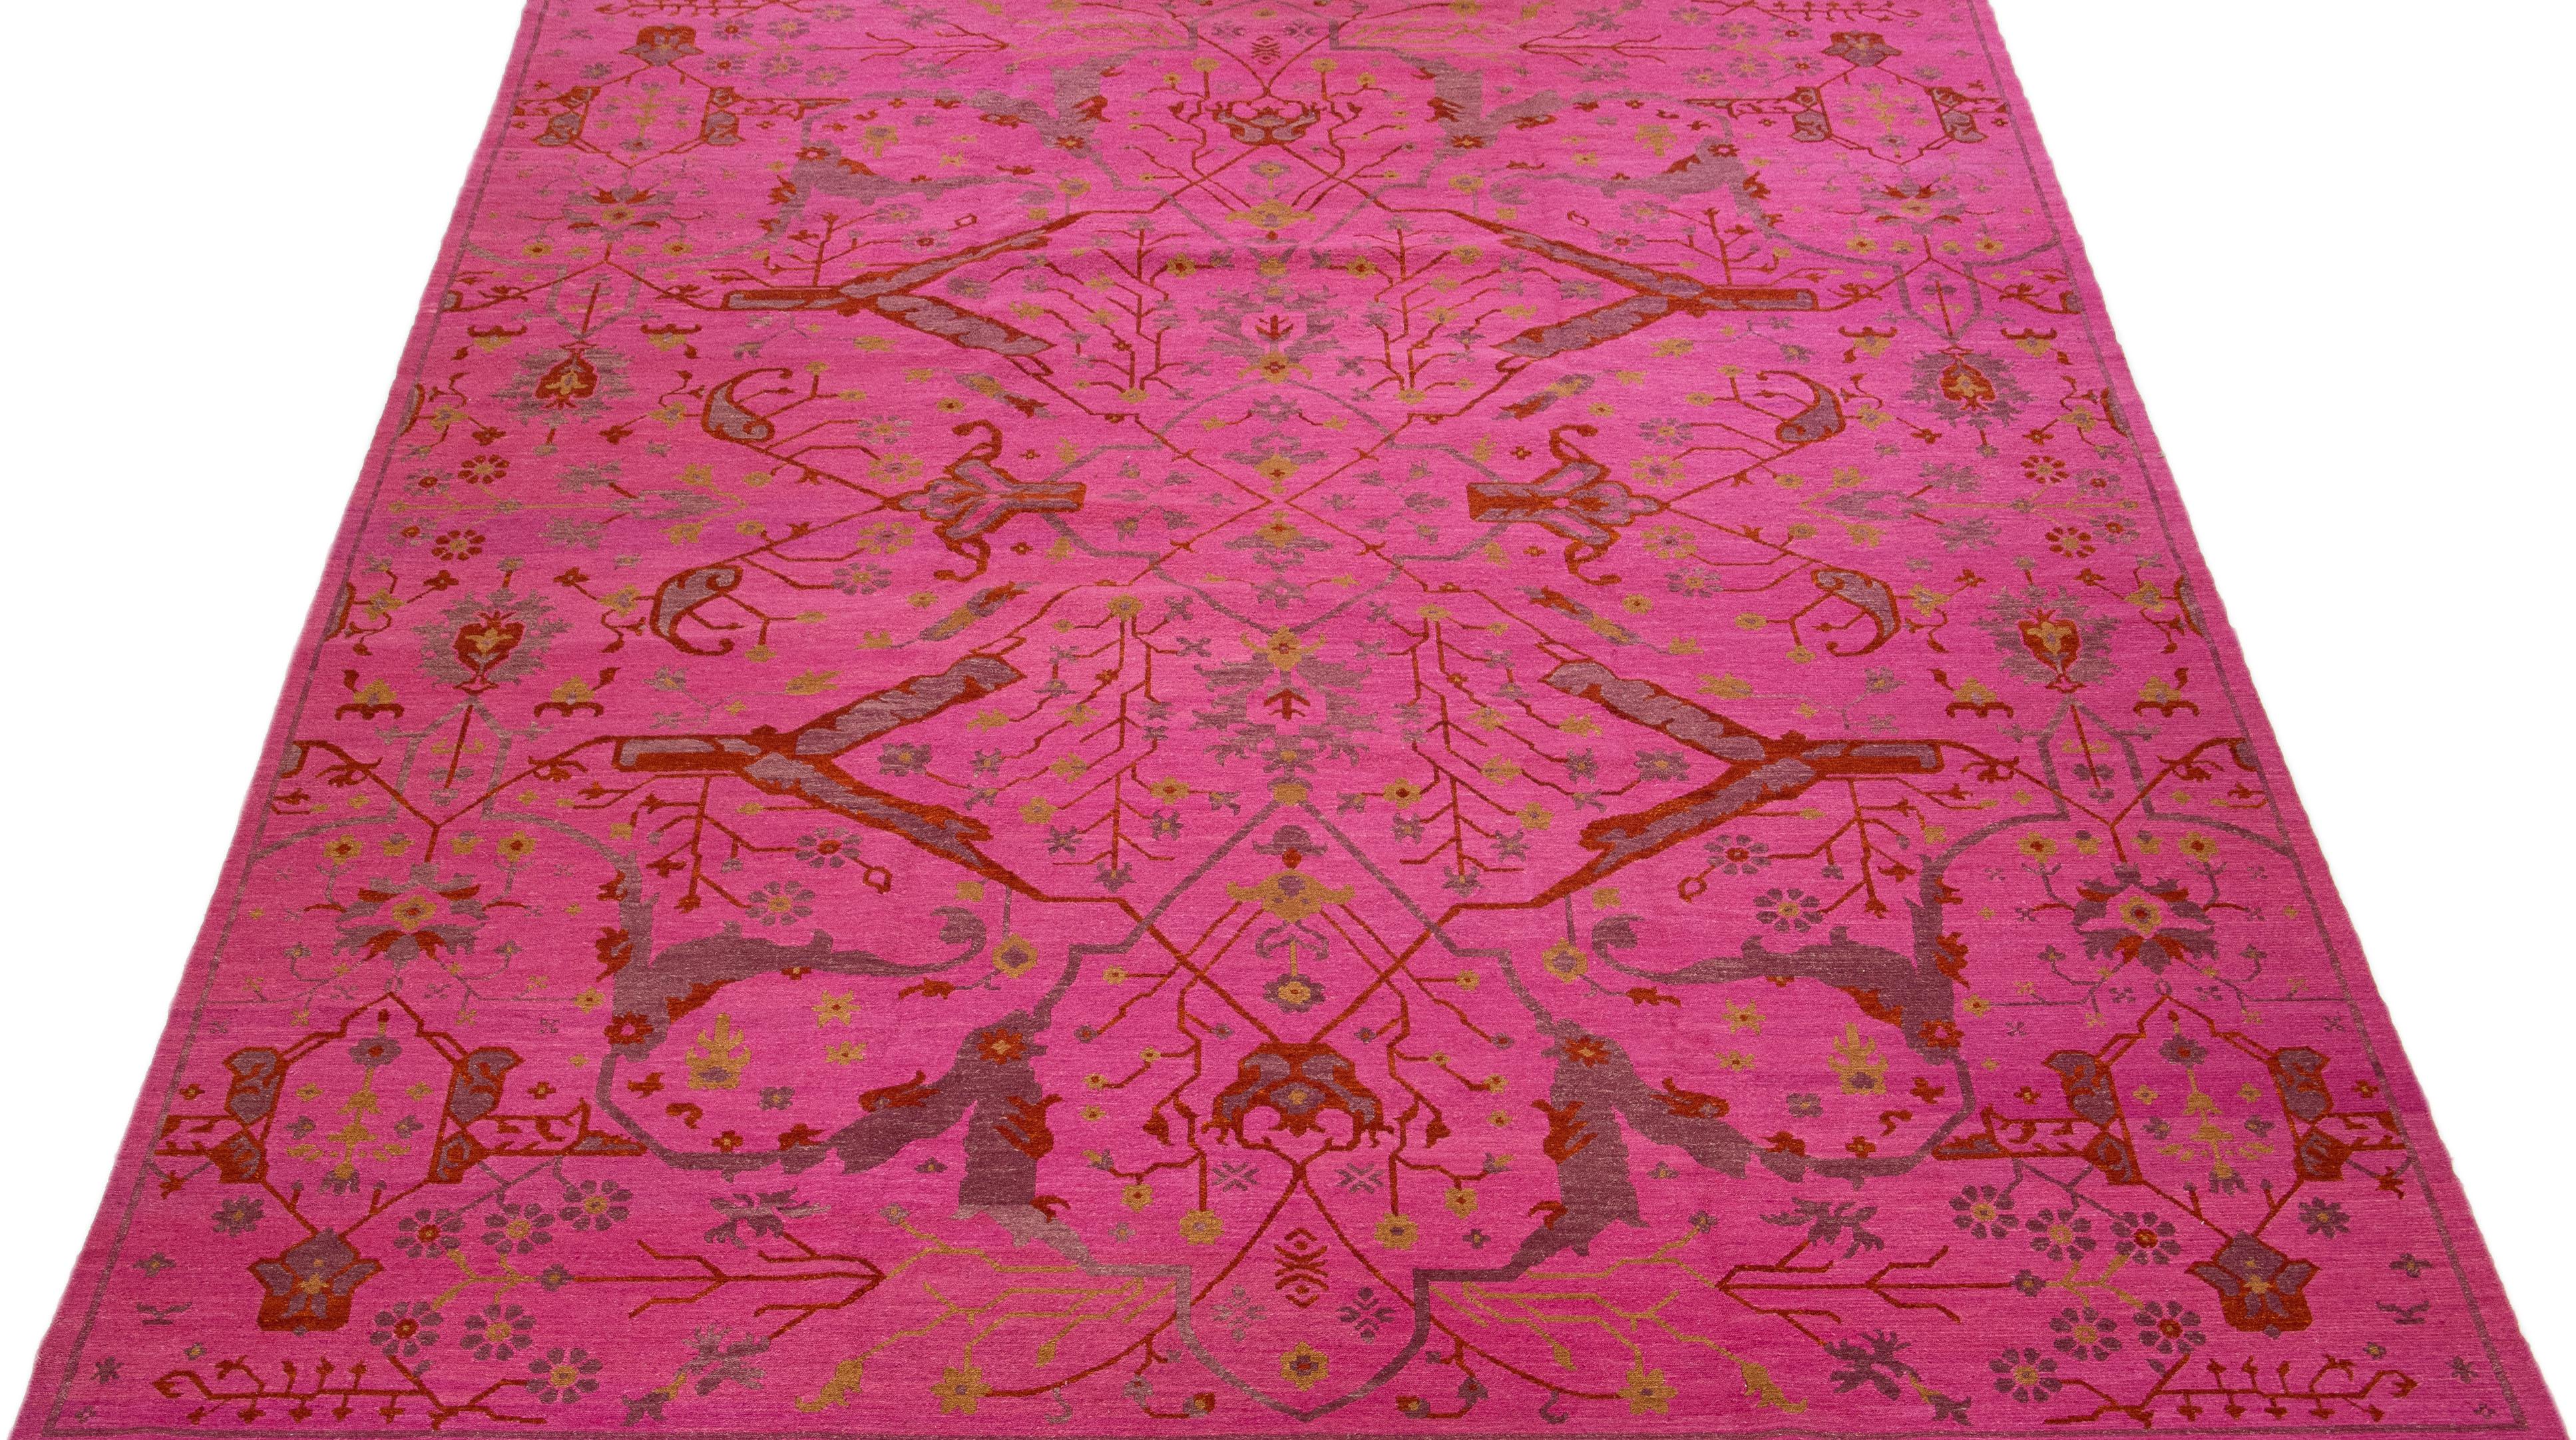 Beautiful antique Indian hand-knotted wool rug with a pink color field. This piece has a gorgeous allover floral design in rust, gray, and goldenrod colors.

This rug measures 12' x 15'.

Our rugs are professional cleaning before shipping.